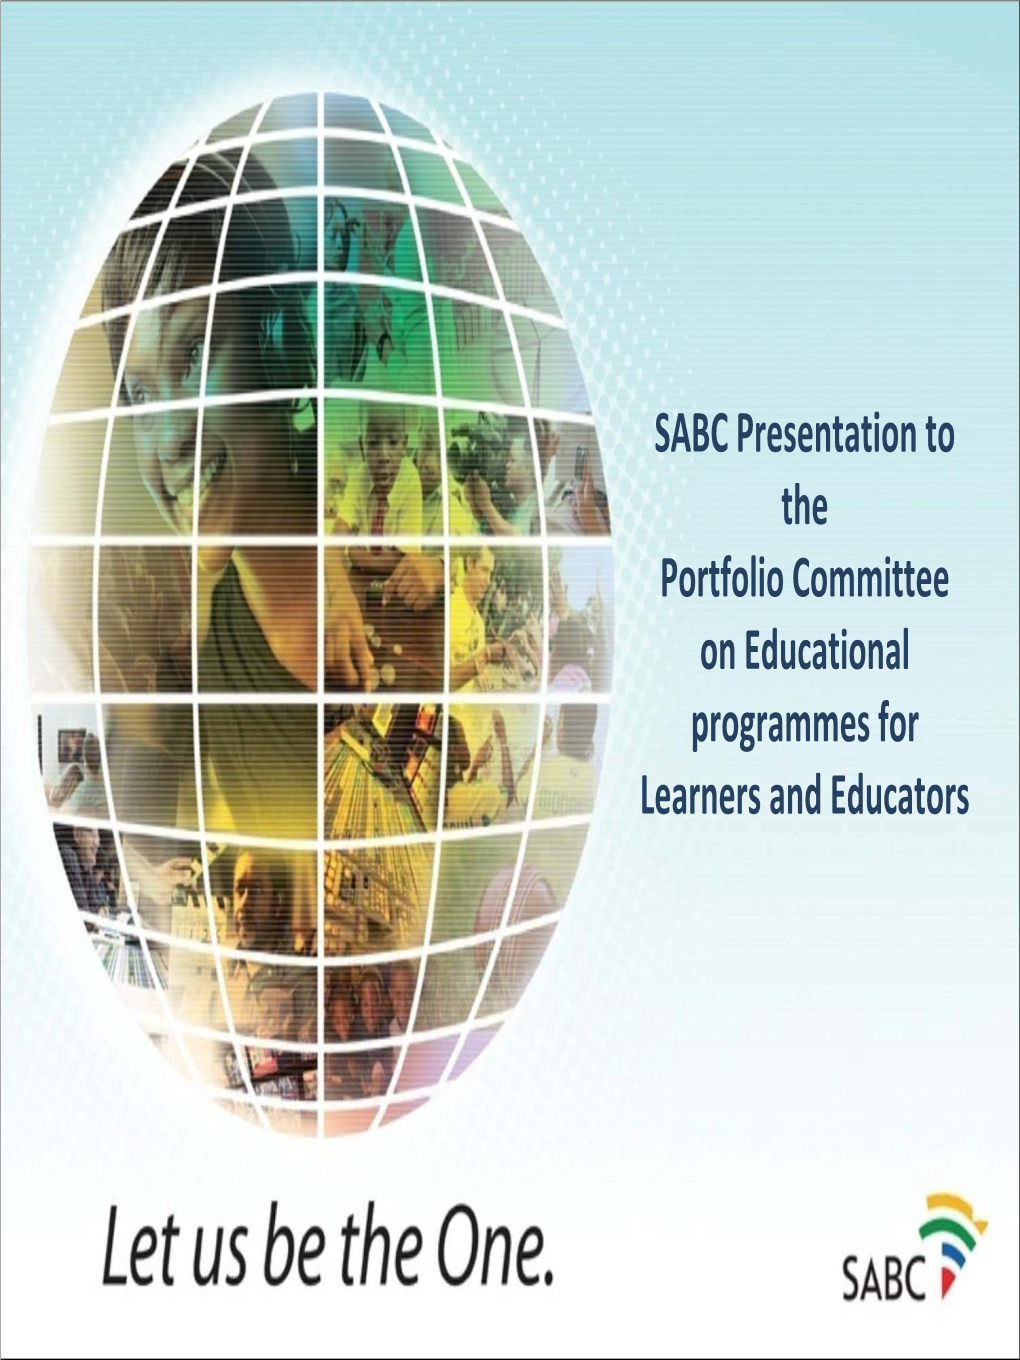 SABC Presentation on Educational Programmes for Learners And